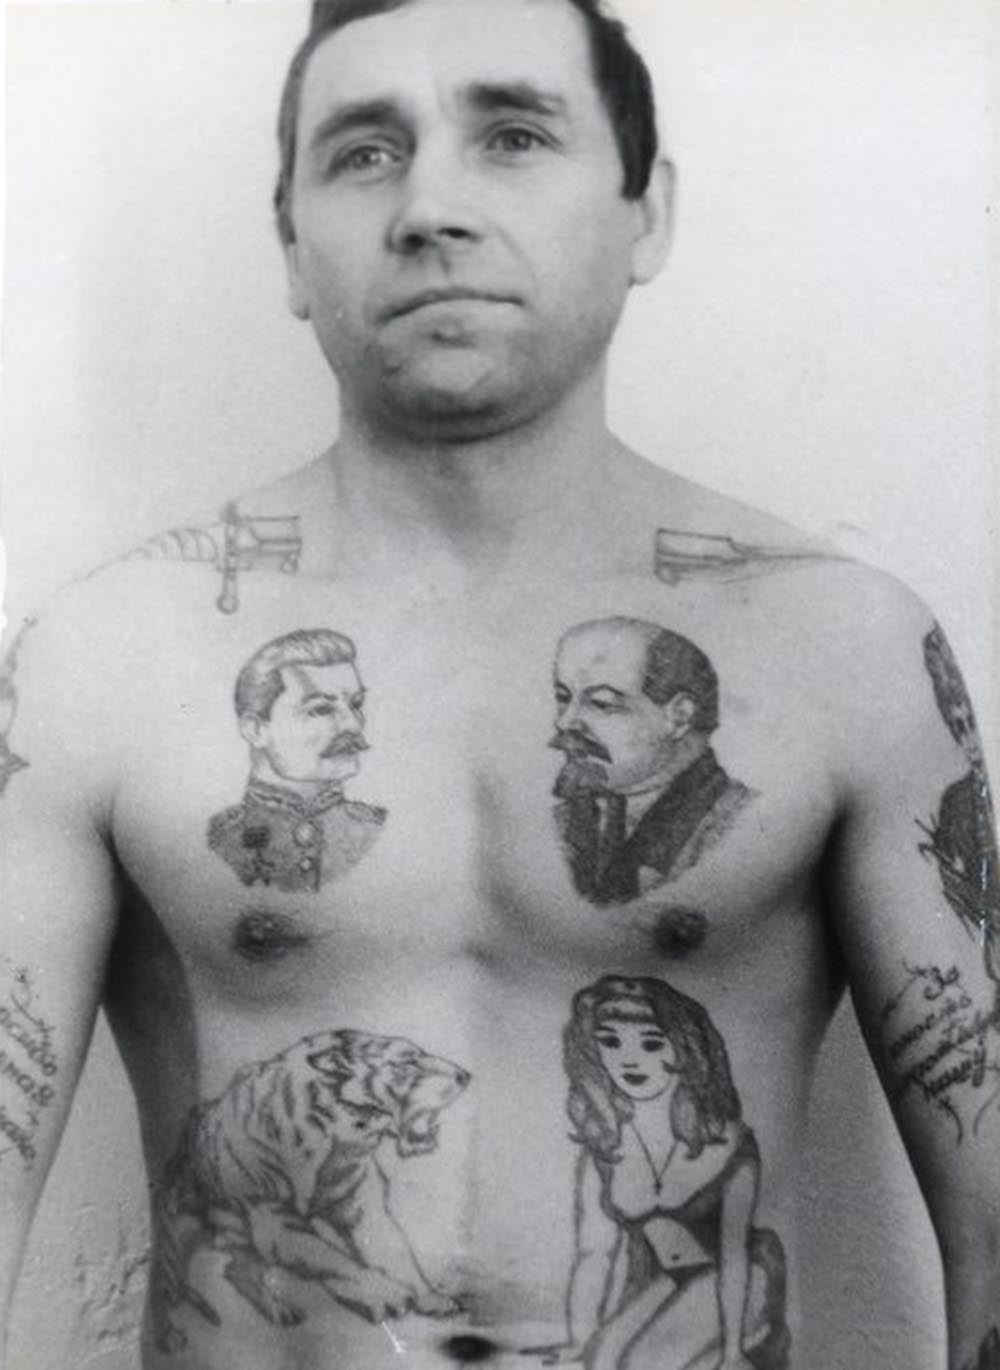 Text on the arm reads 'Thank you Dear Motherland for my ruined youth.' A dagger through the neck shows that a criminal has committed murder in prison and is available to hire for further killing. The drops of blood can signify the number of murders committed. Lenin is held by many criminals to be the chief 'pakhan' (boss) of the Communist Party. The letters BOP, which are sometimes tattooed under his image, carry a double meaning: The acronym stands for 'Leader of the October Revolution' but also spells the Russian word 'VOR' (thief).